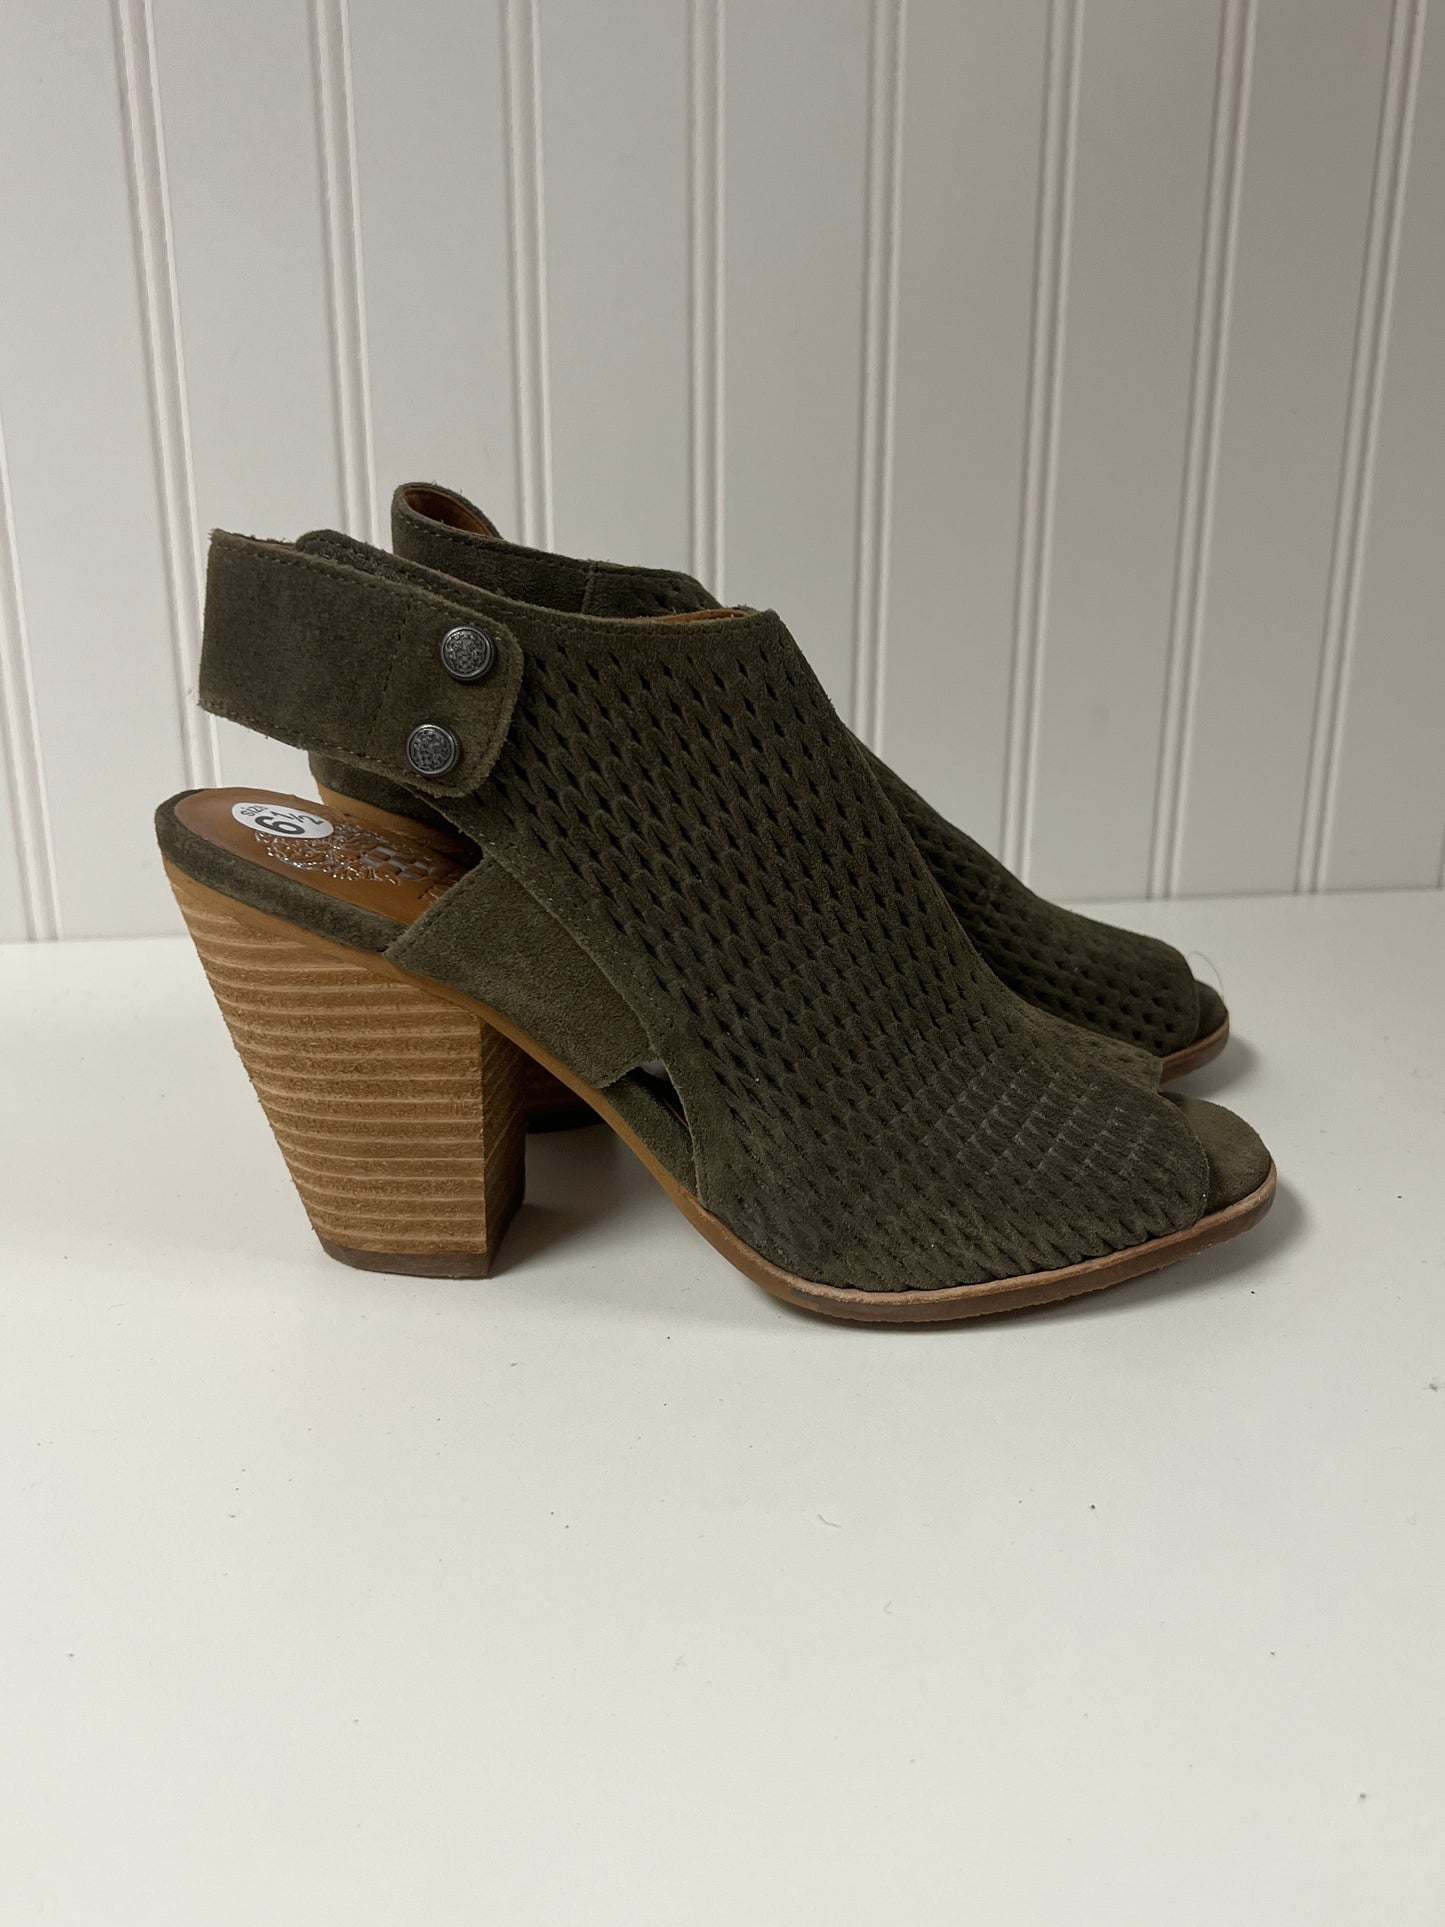 Green Shoes Heels Block Vince Camuto, Size 6.5